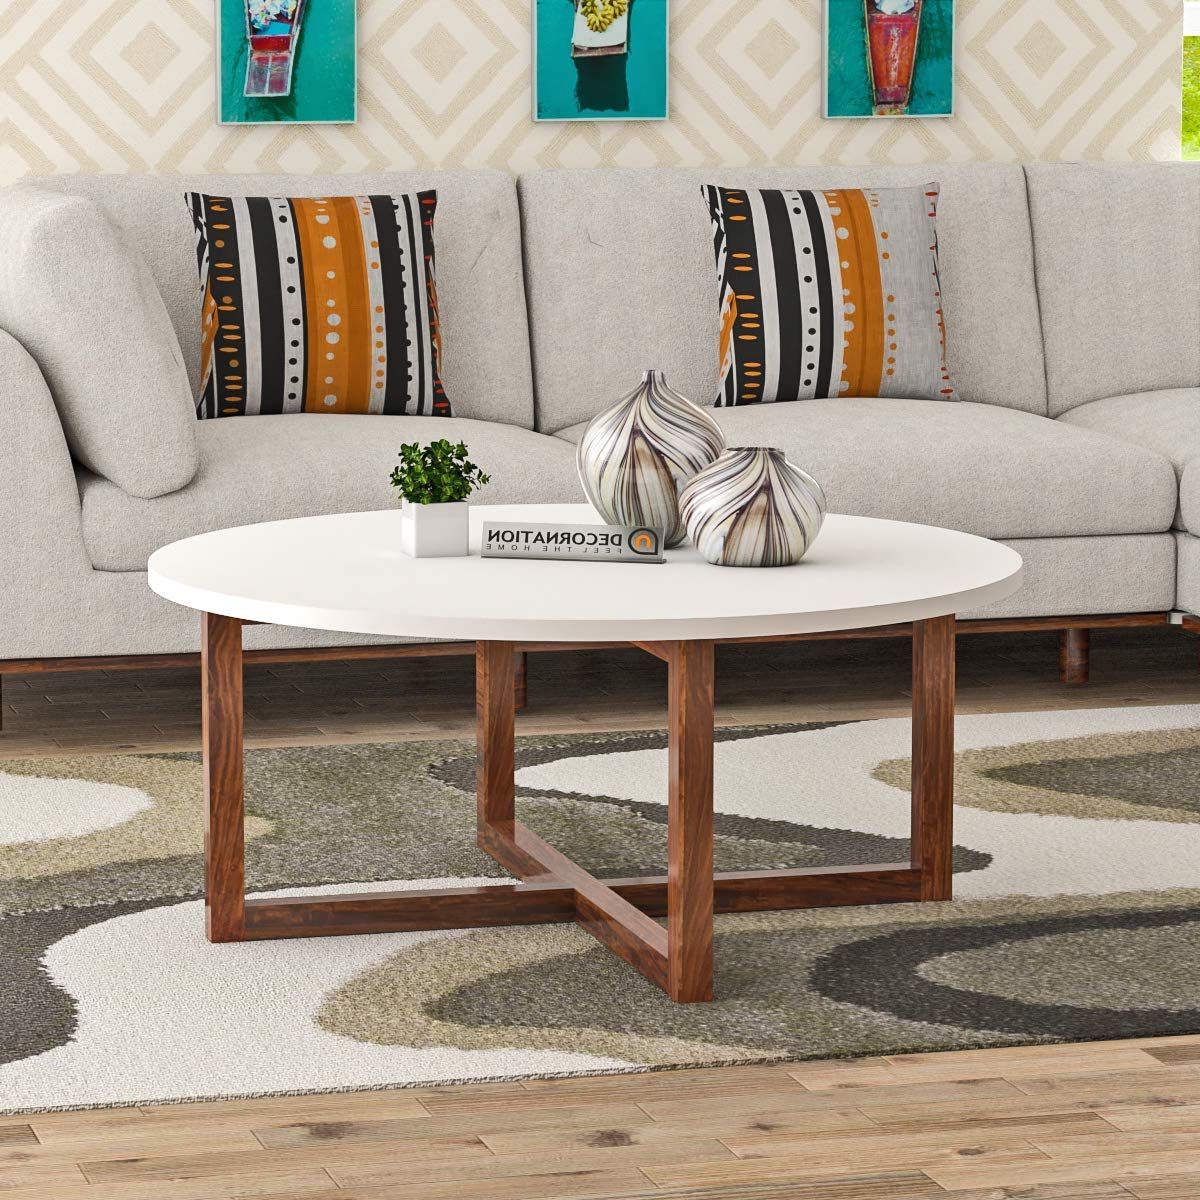 Wooden Mdf Round Coffee Table With Solid Wood Legs – White Regarding Trendy Wood Coffee Tables (View 17 of 20)